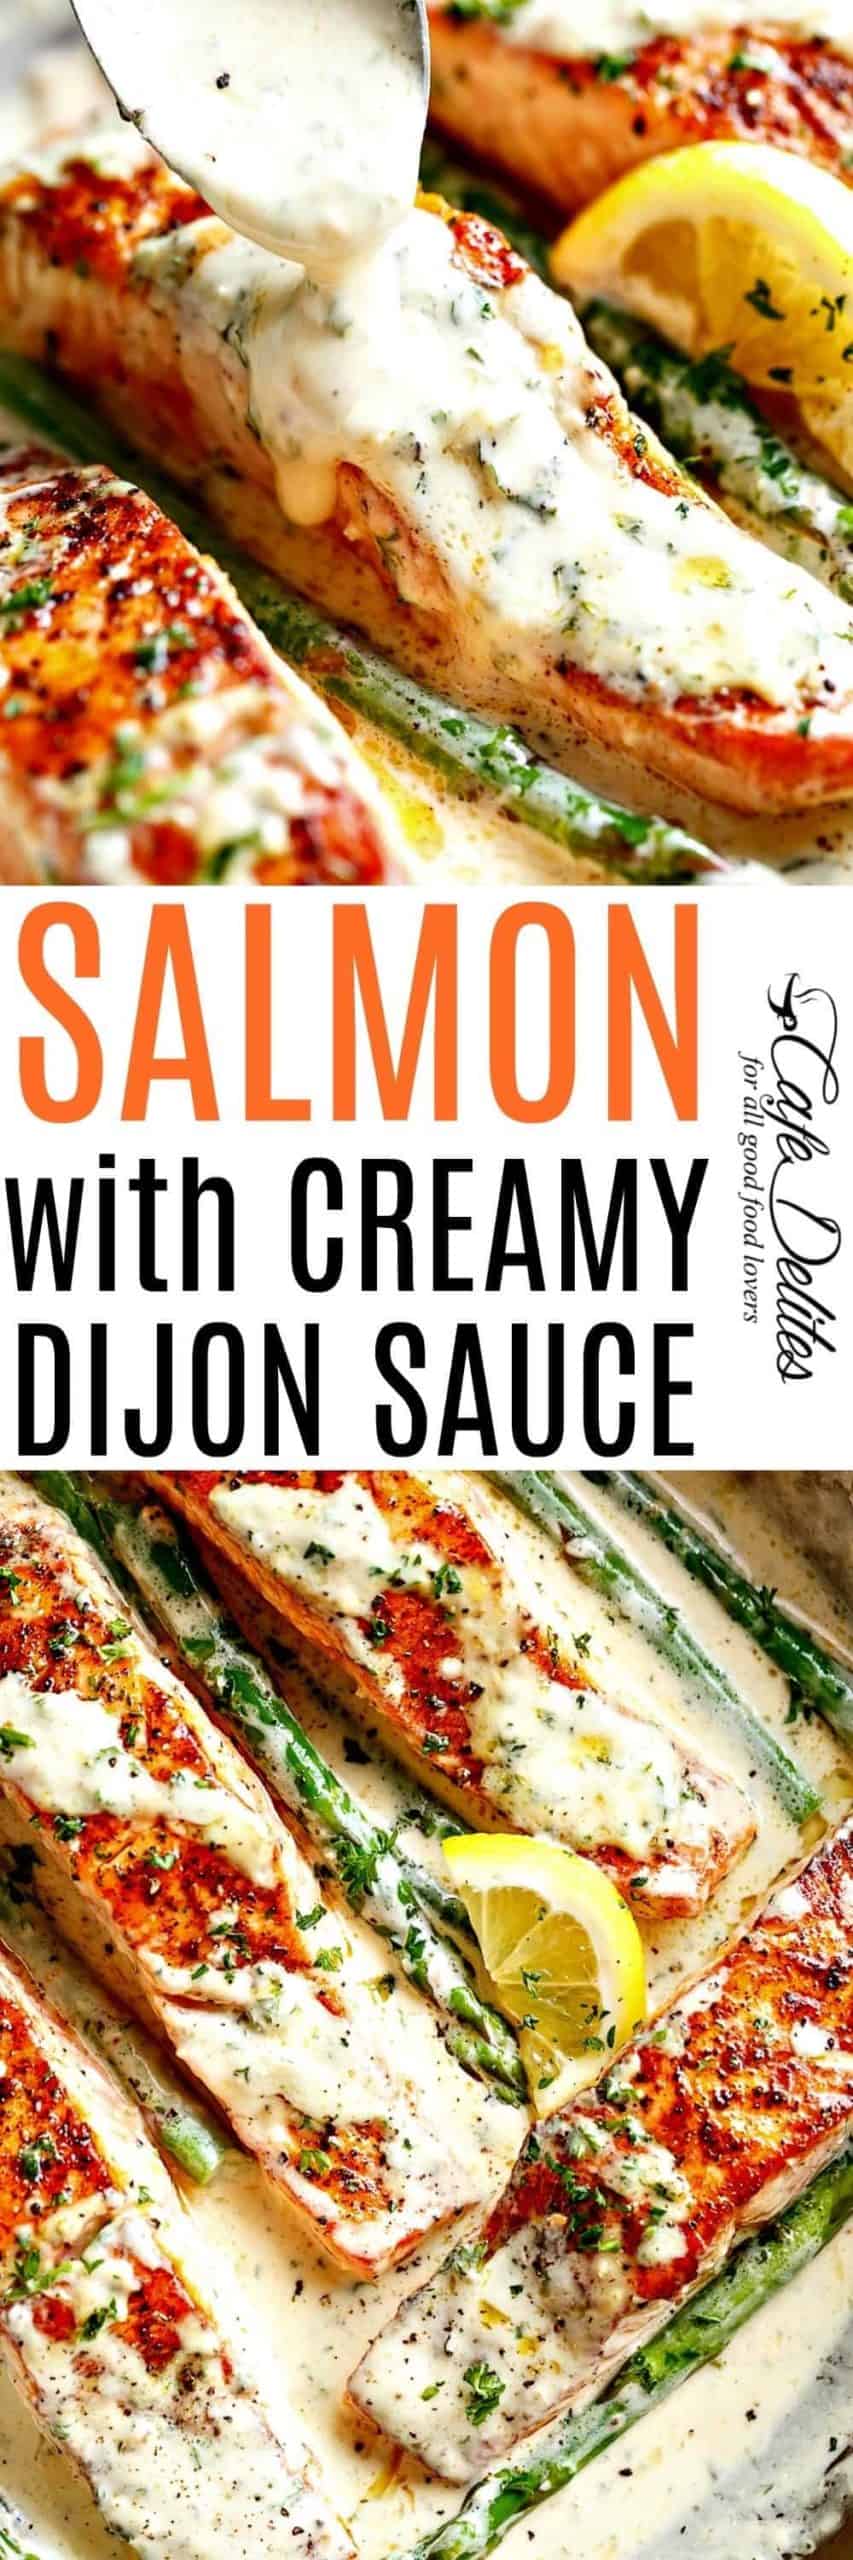 Salmon with a creamy Dijon sauce is a deliciously foolproof recipe | cafedelites.com